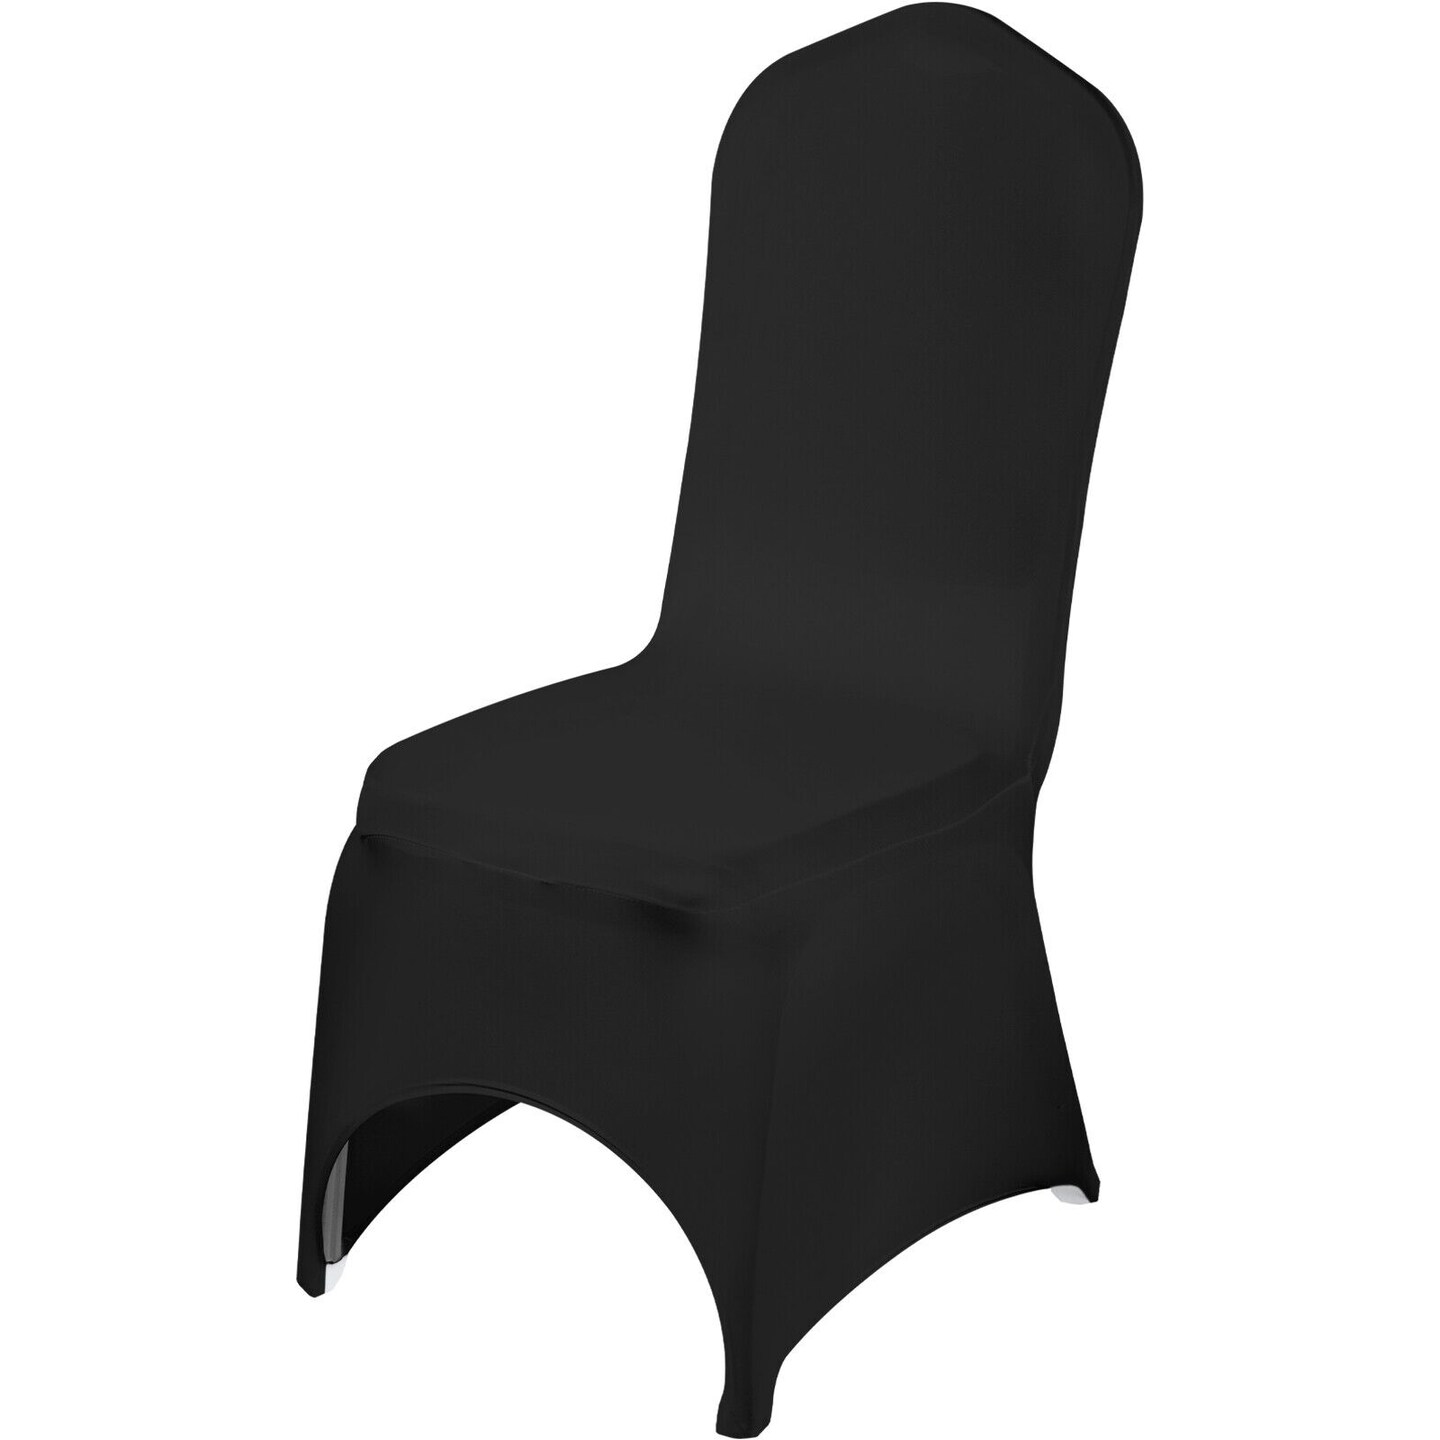 50Pcs Black Stretch Spandex Folding Chair Covers for Formal